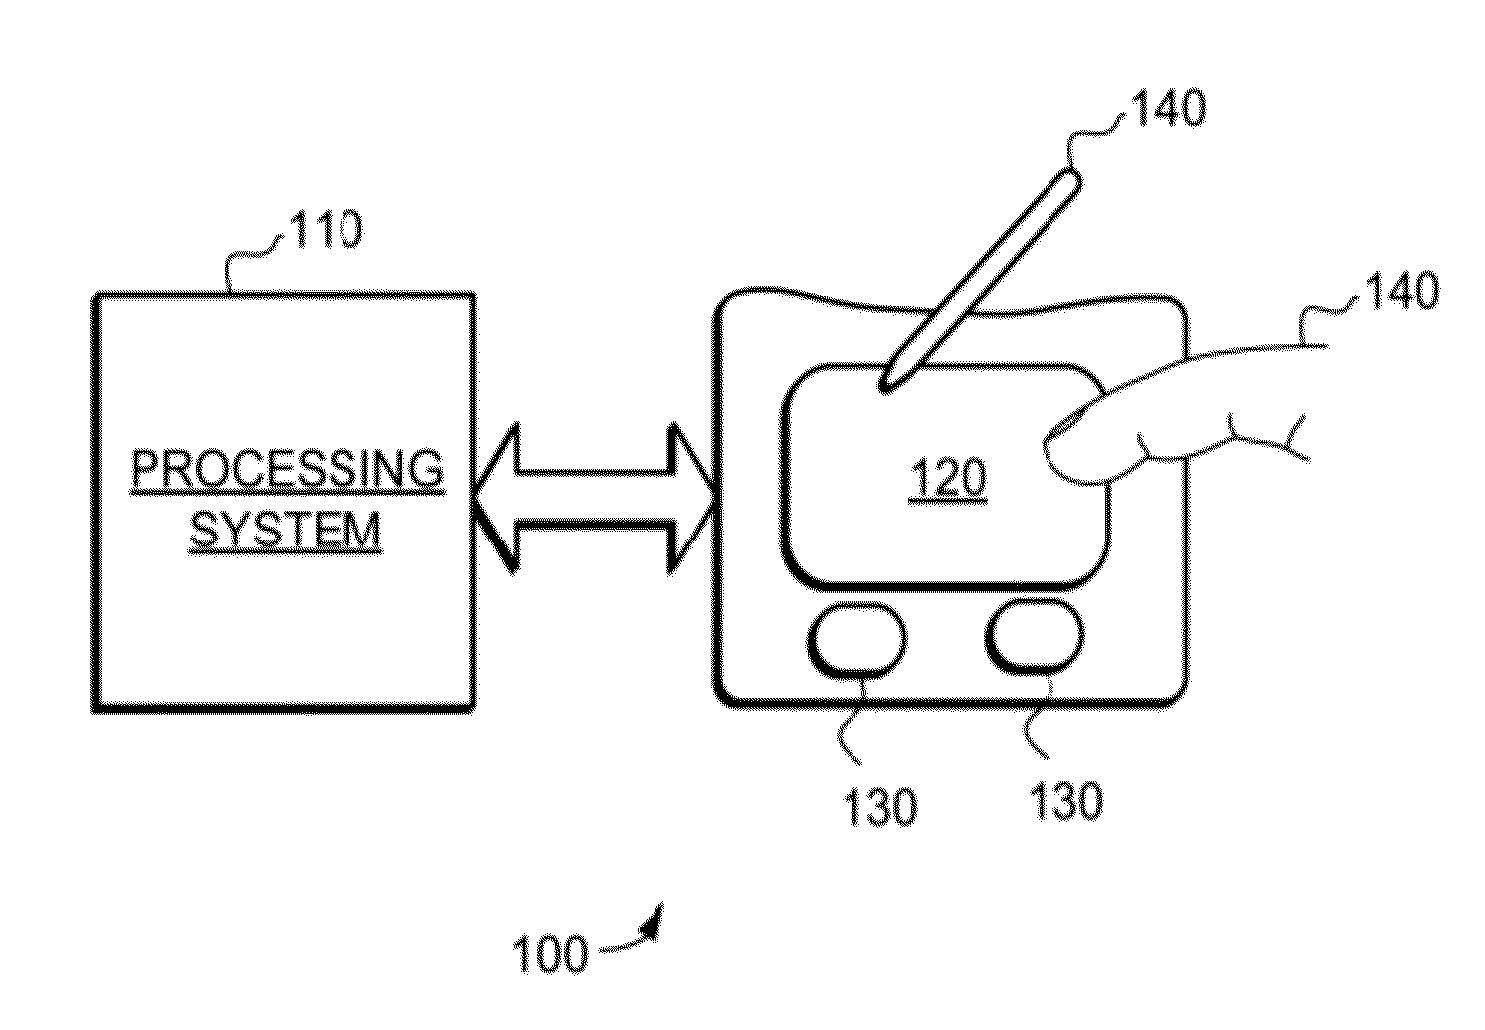 System and method for determining user input from occluded objects